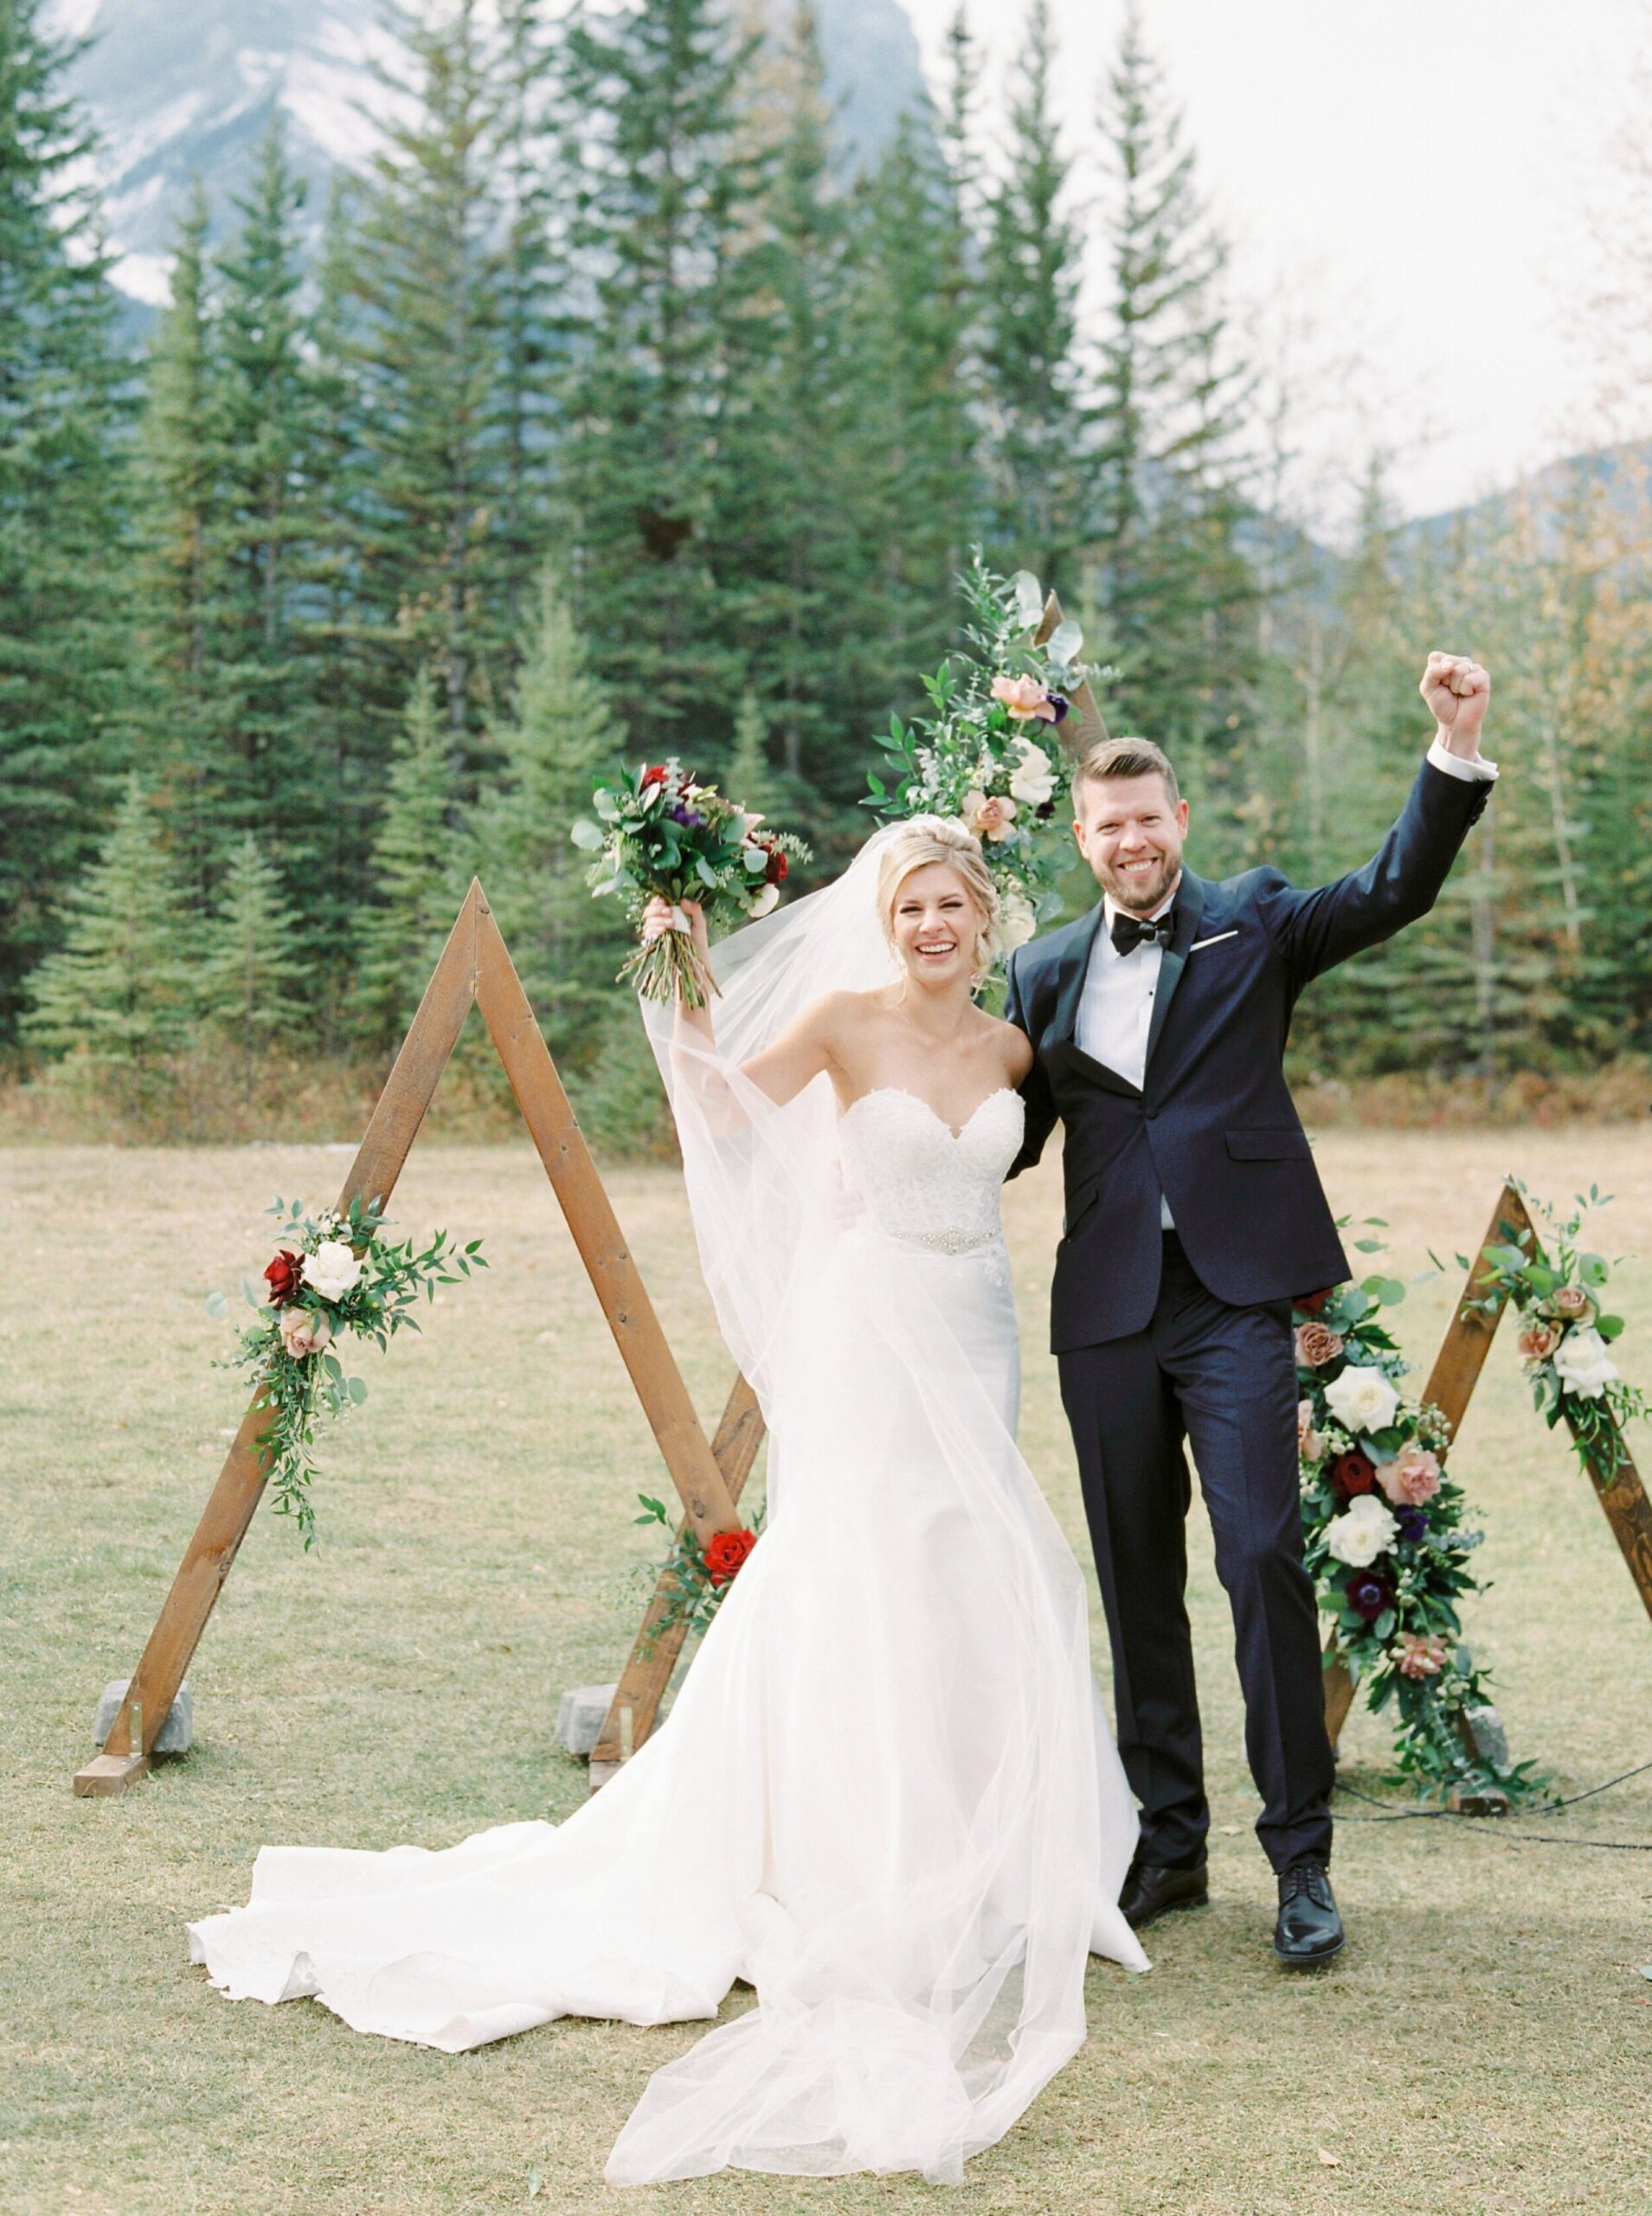  YAY we're married | best reaction photos | Outdoor mountain ceremony with a triangle floral arch | Cornerstone Theater & Canmore Ranch Wedding Photographers 